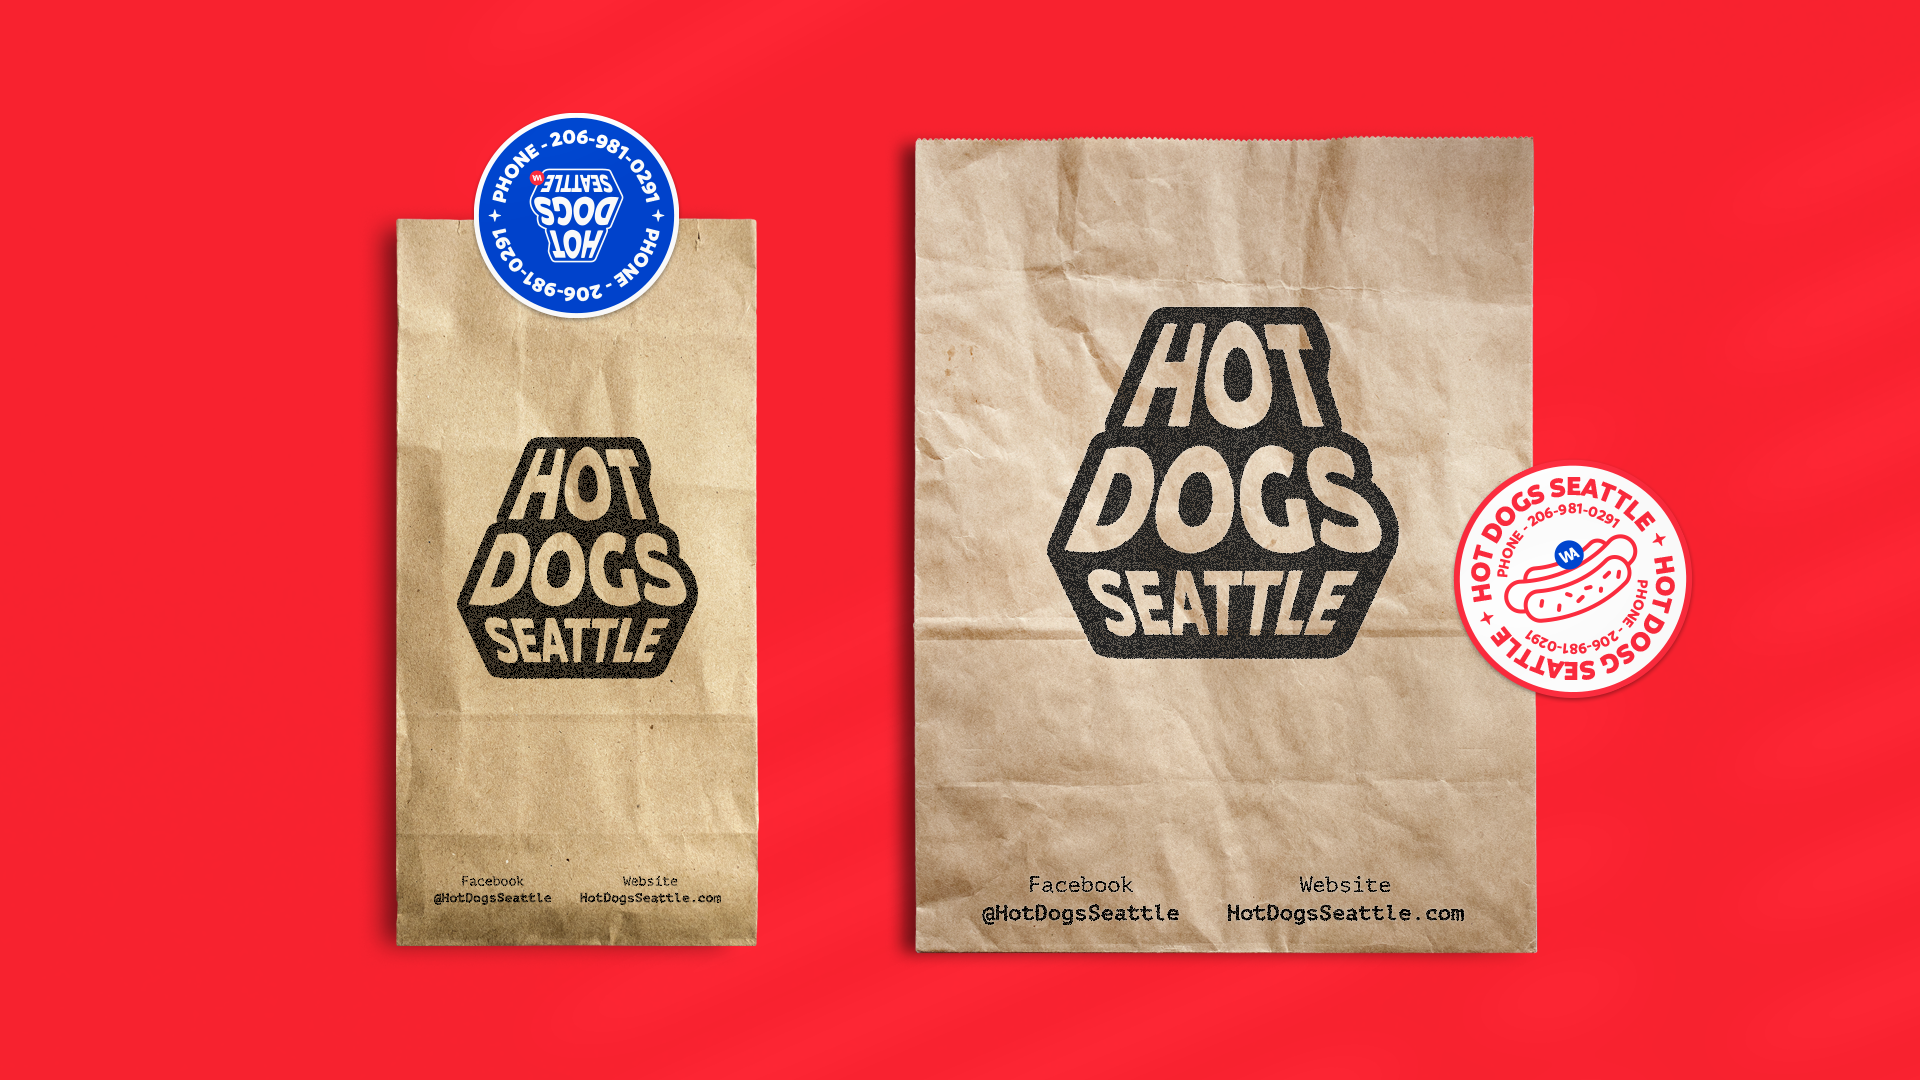 Hot Dogs Seattle